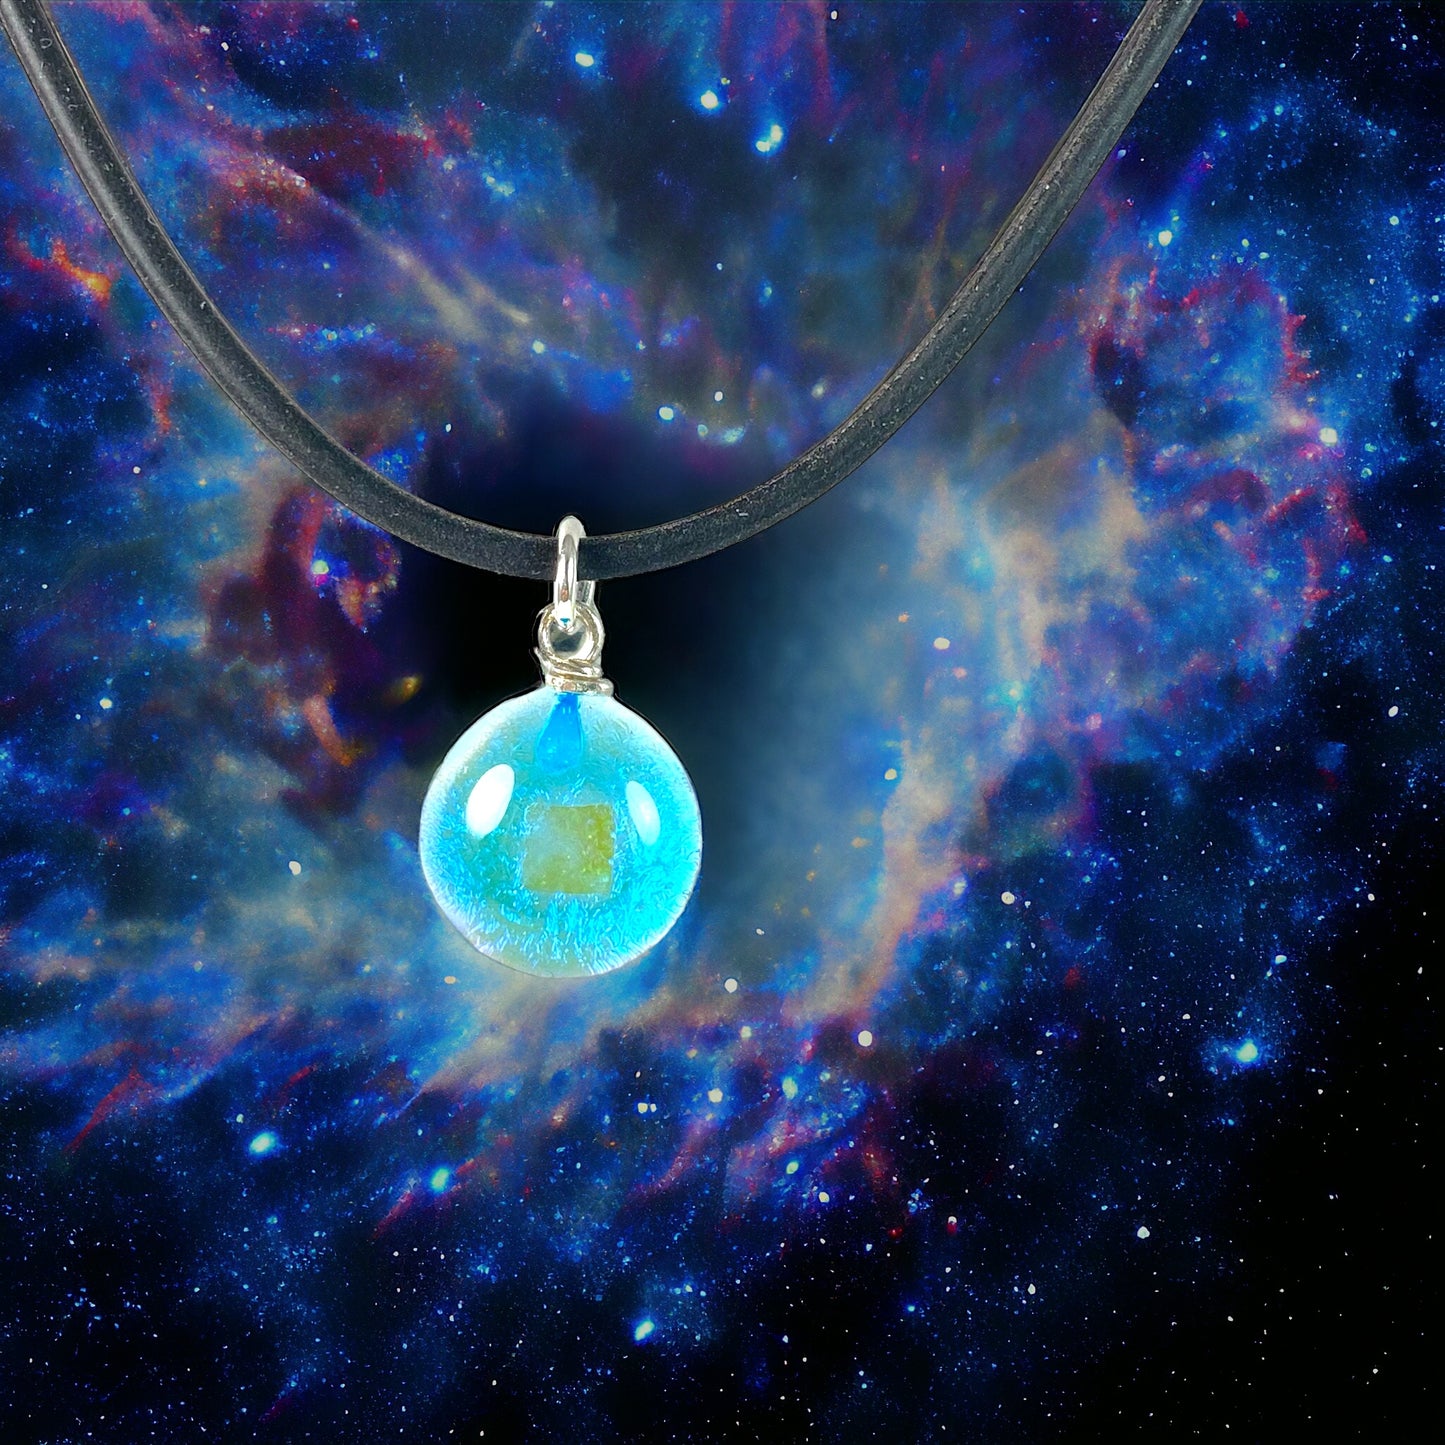 Space Ball Necklace in Aqua Blue